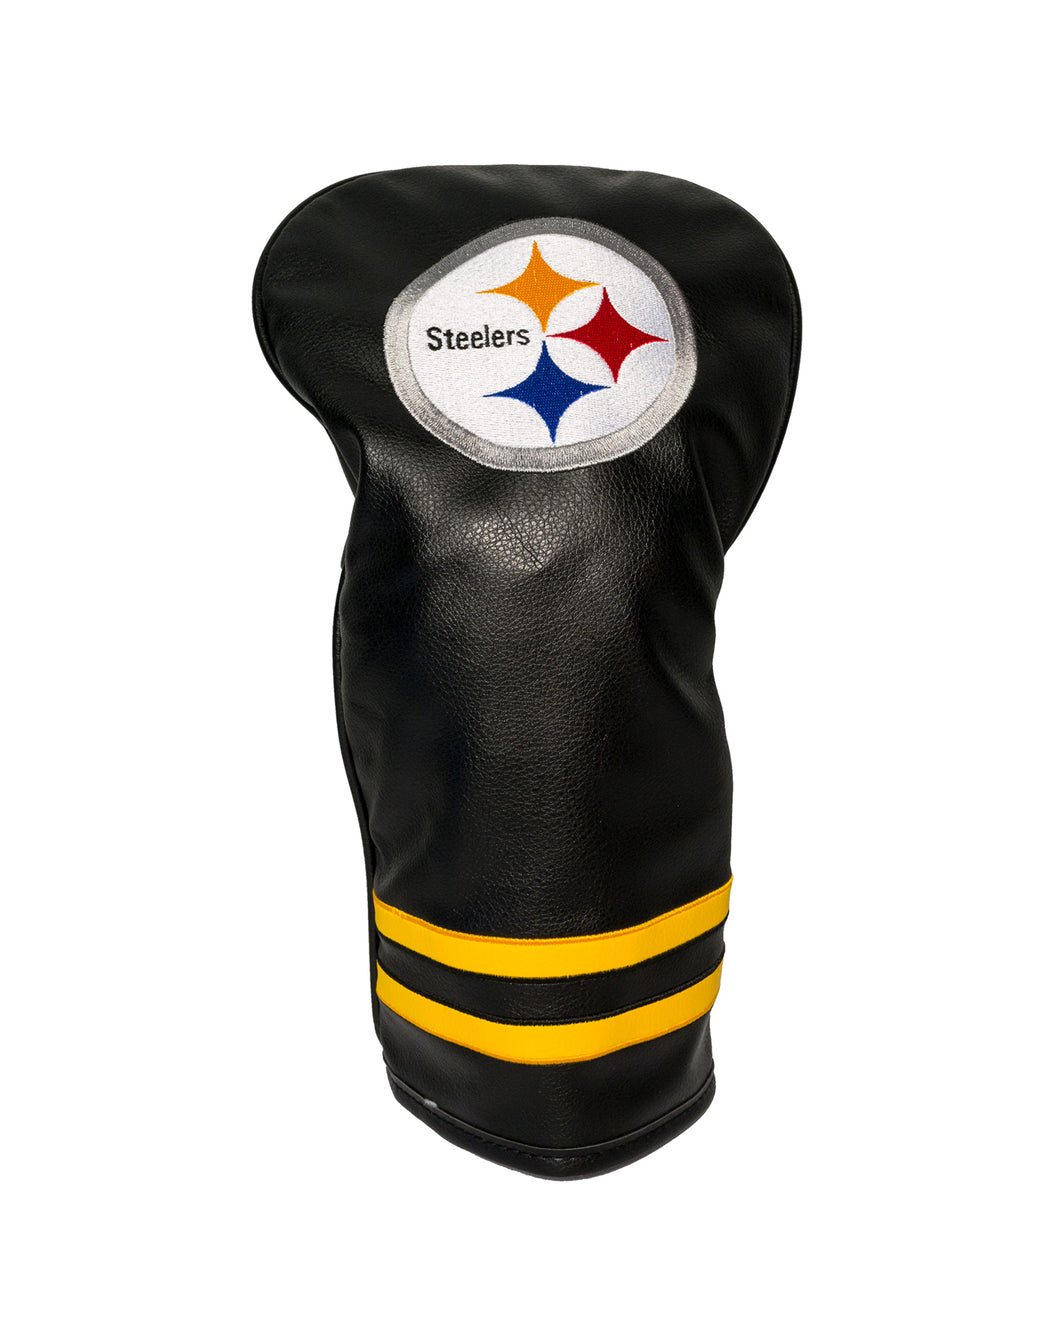 NFL Official Vintage Golf Driver Headcover. Pittsburgh Steelers.